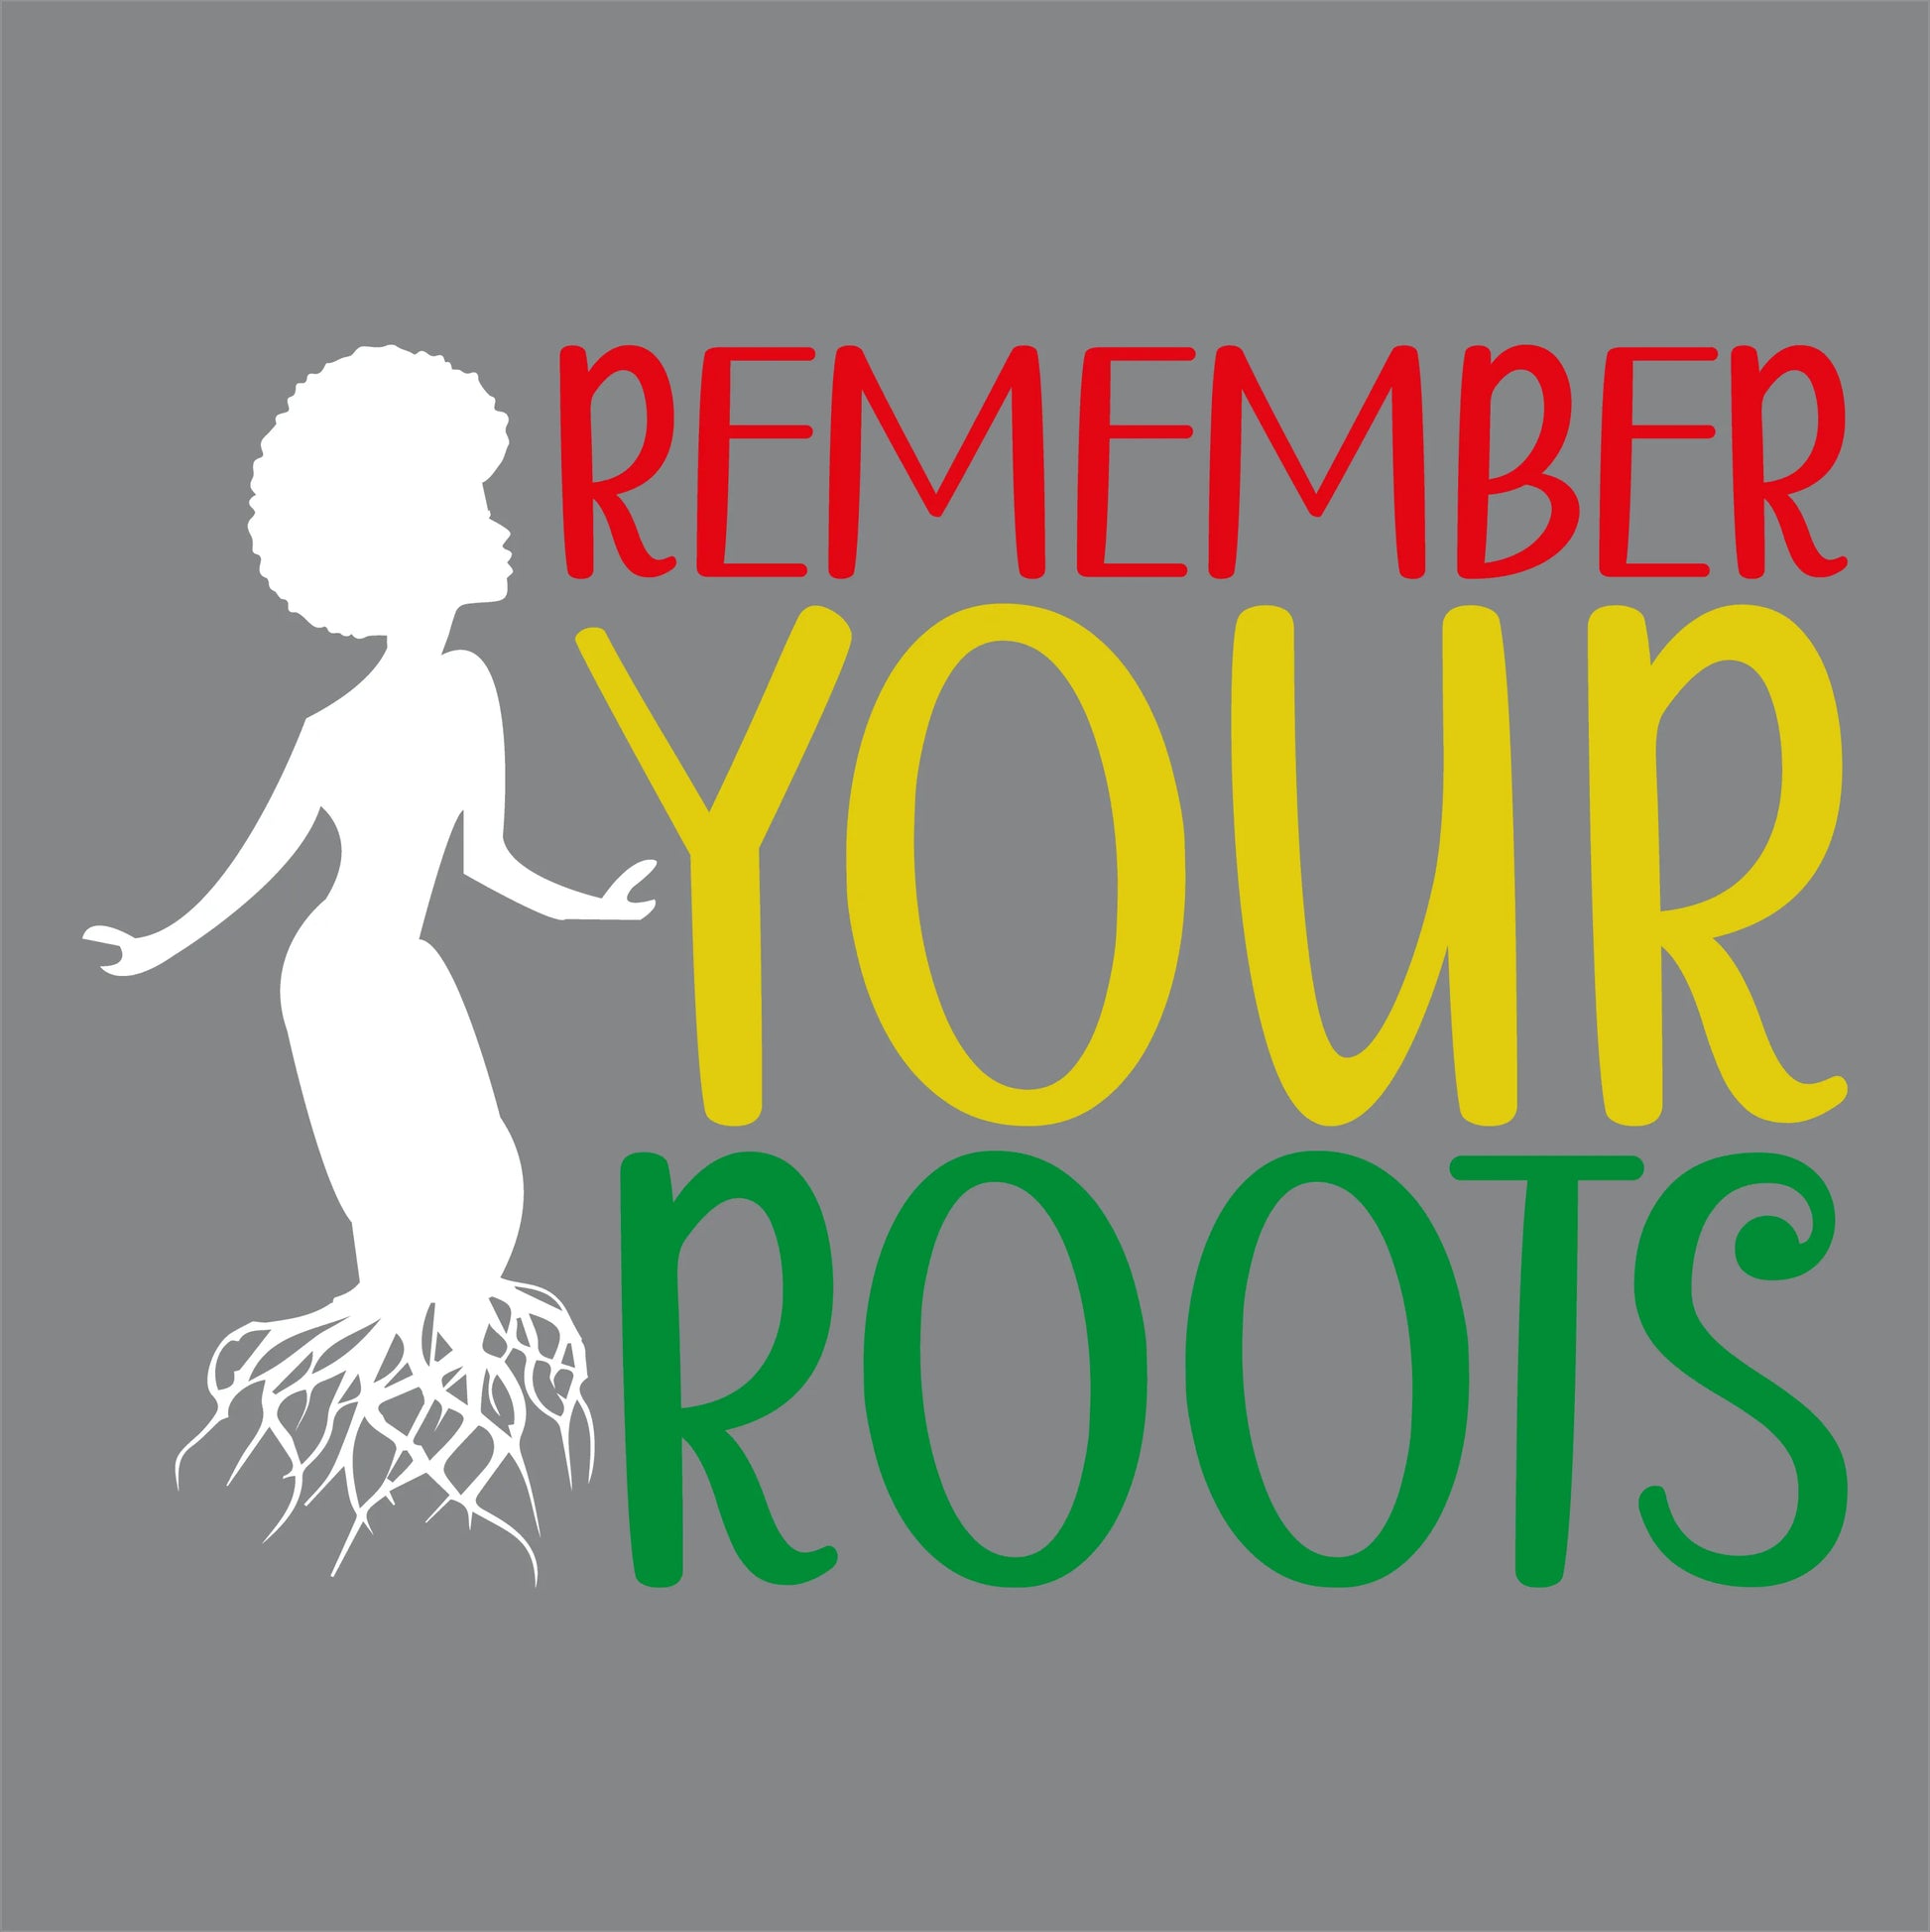 BHM 12  - "Remember Your Roots" DTF Transfer, DTF Transfer, Apparel & Accessories, Ace DTF